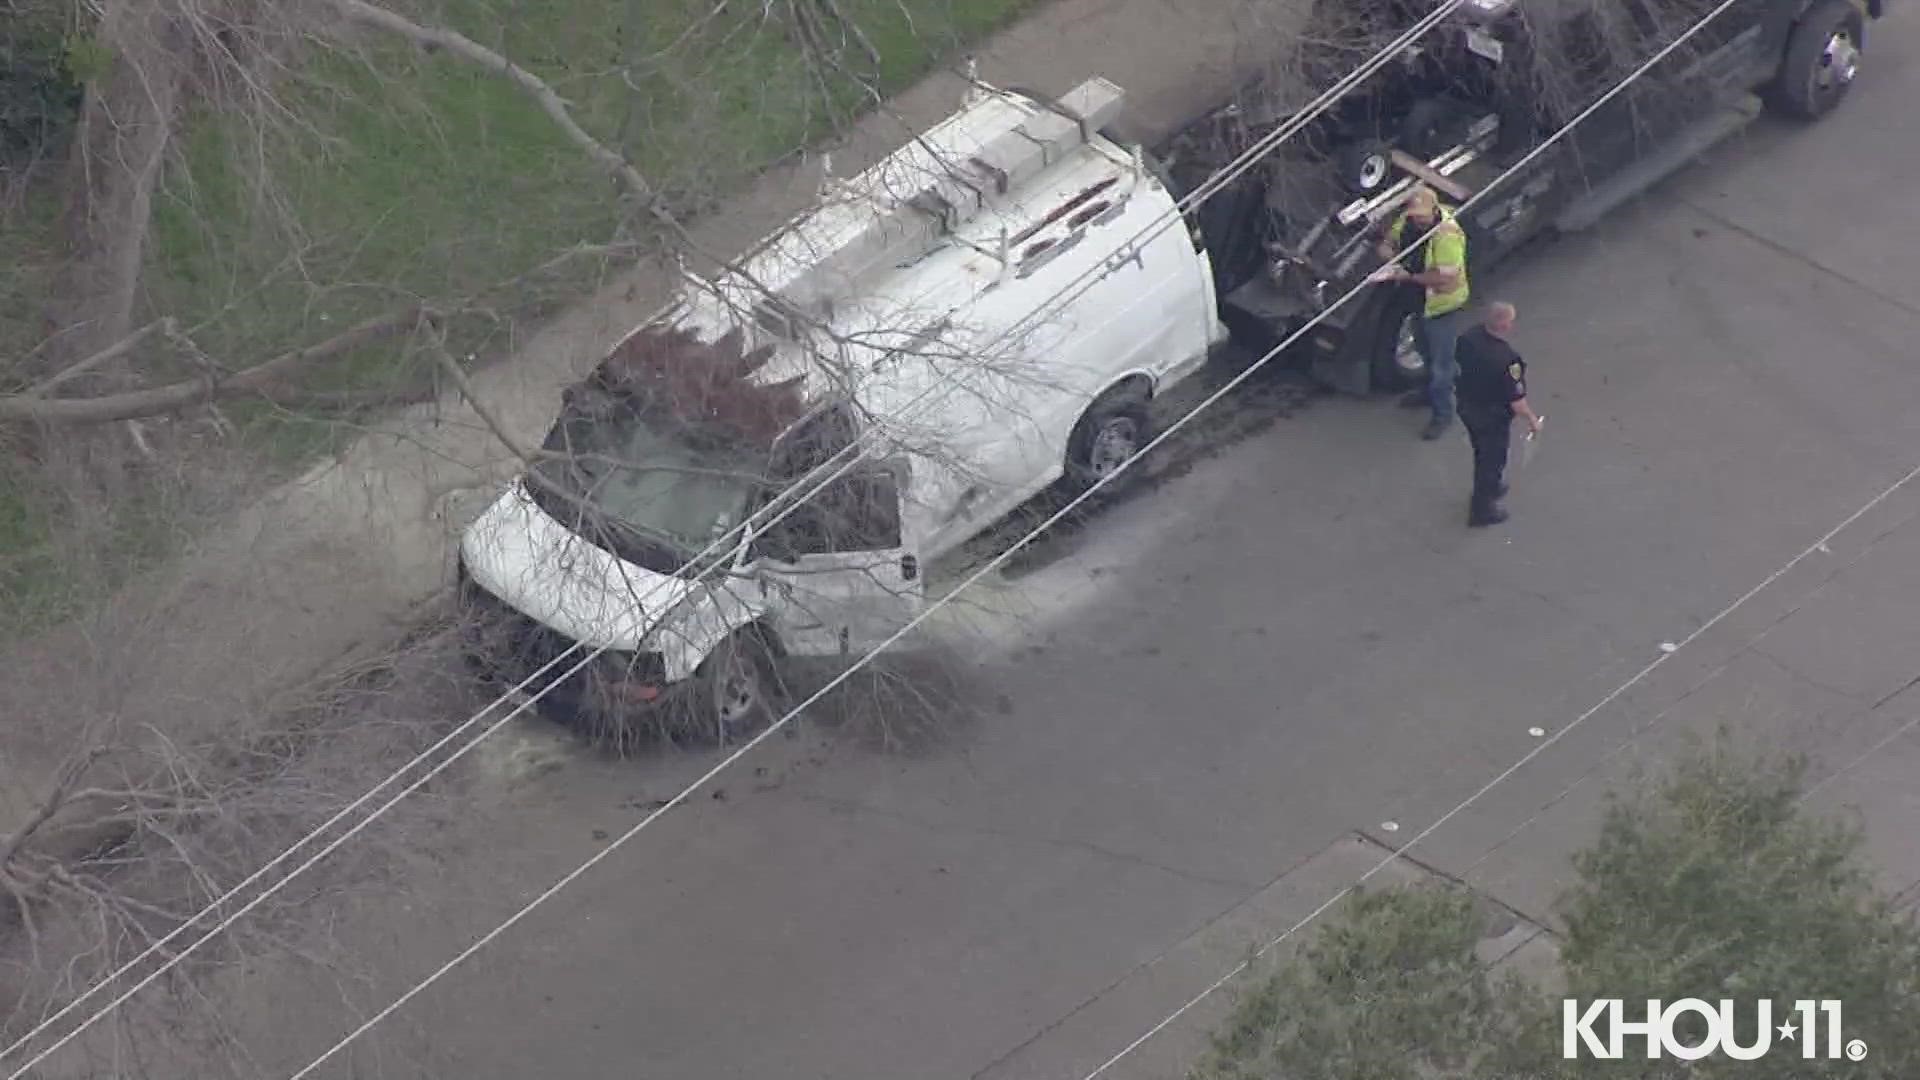 Air 11 video show the scene where a chase came to an end. This video is near Elm at Westward